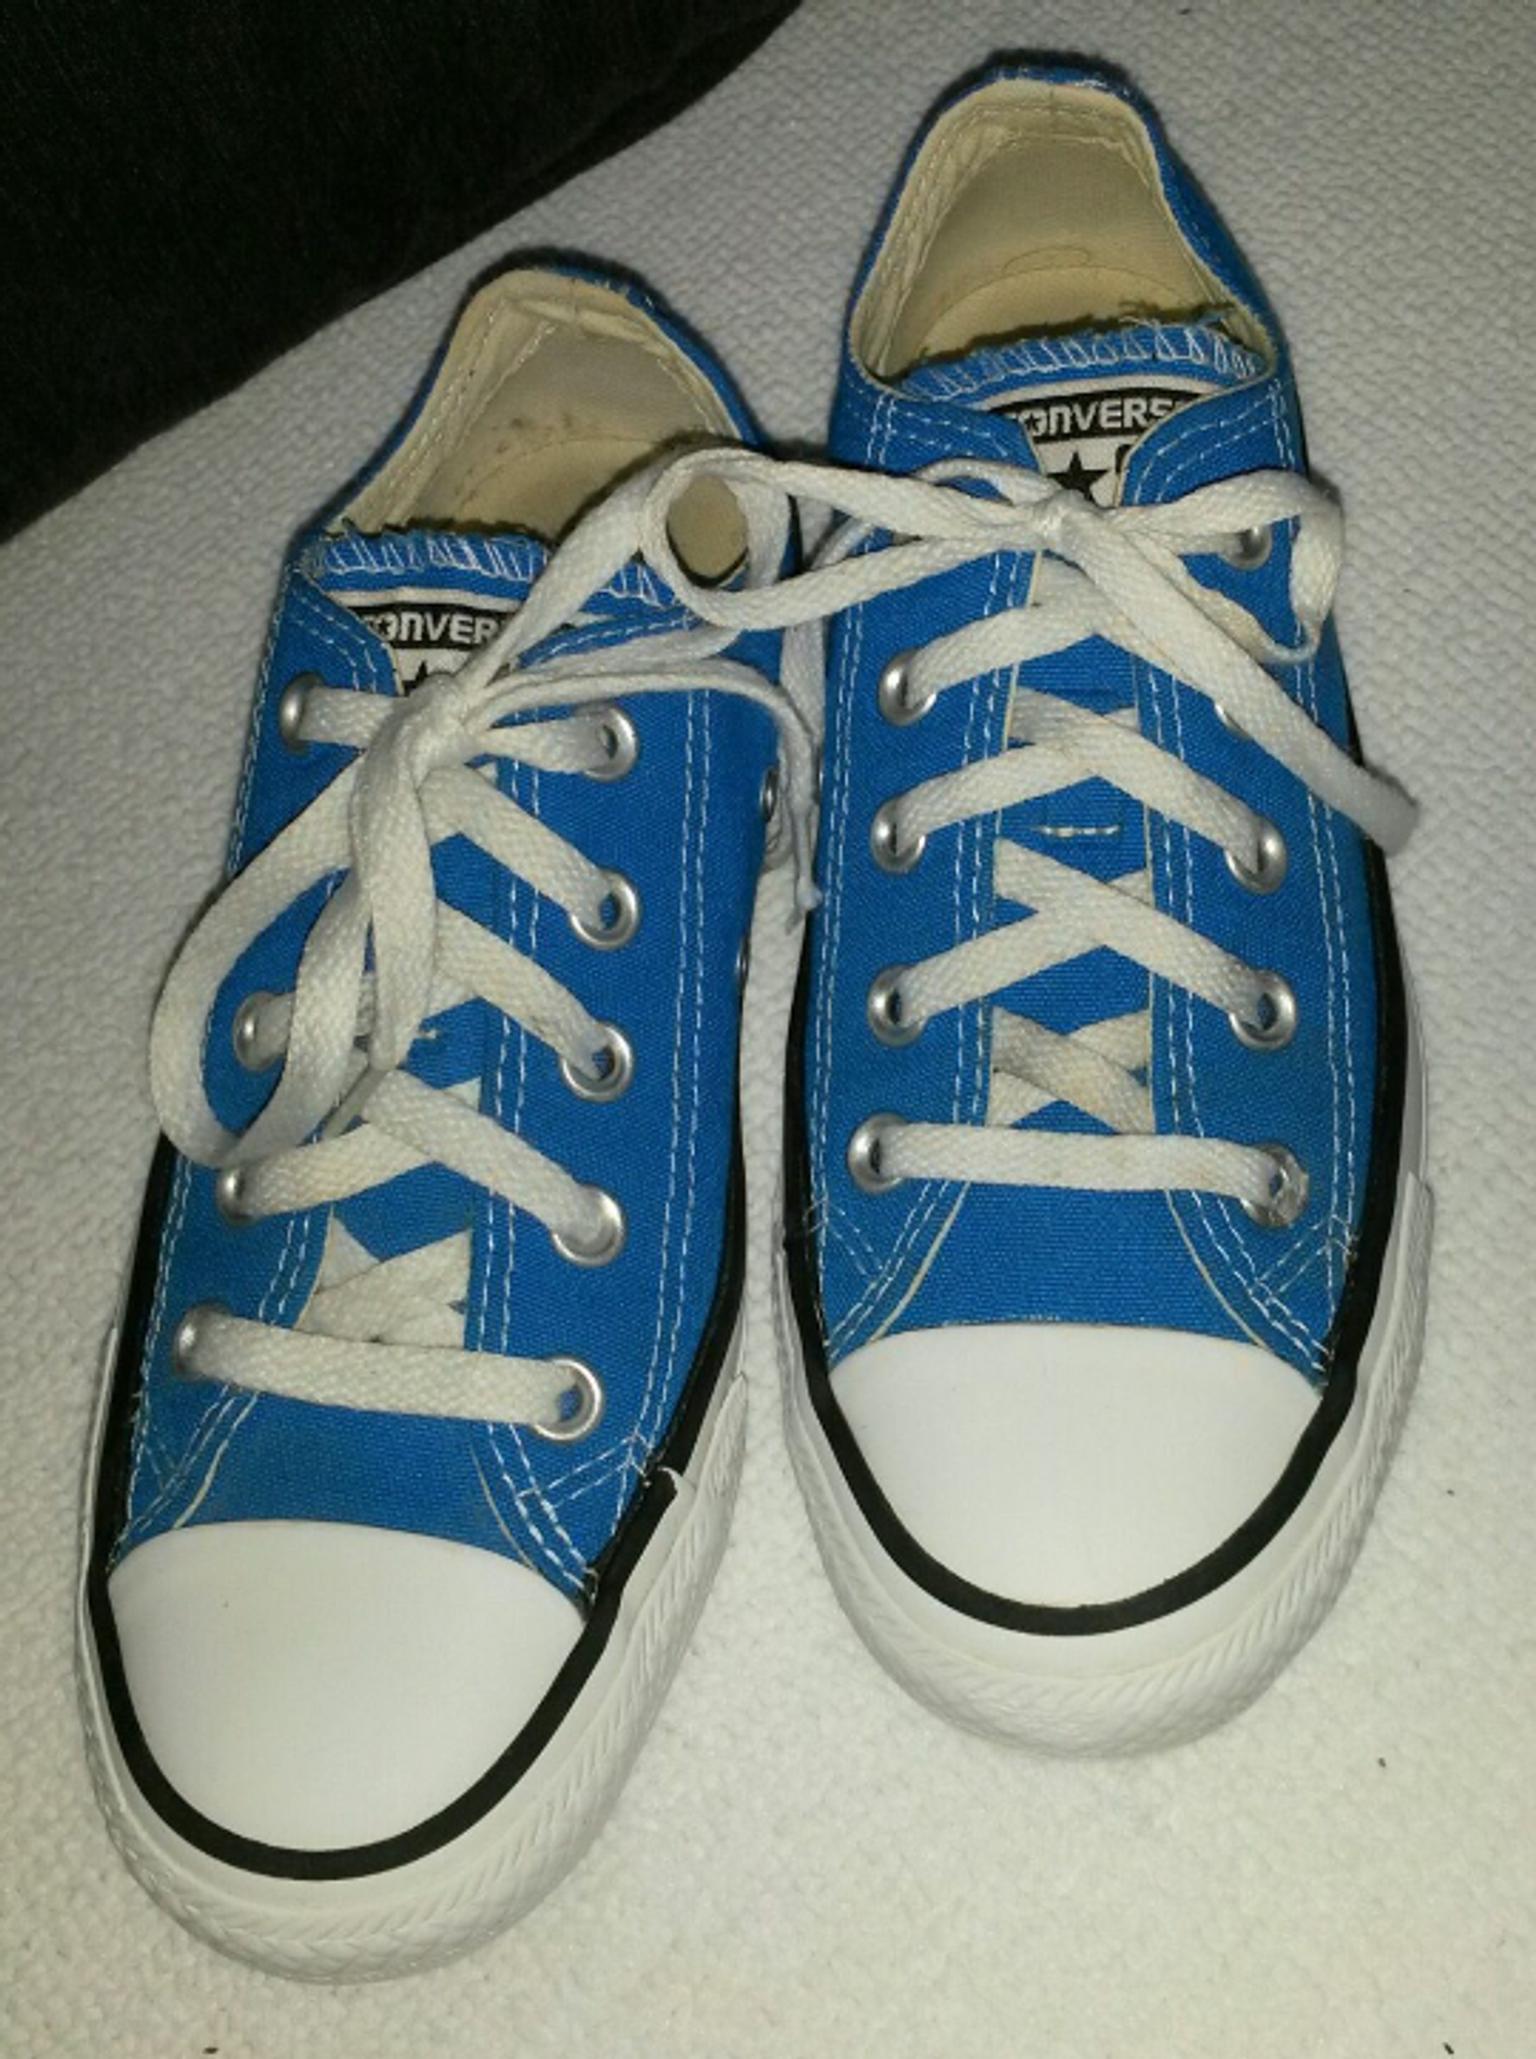 All☆Star Converse, Chucks, Gr. 35 *** in 66787 Wadgassen for €11.00 for  sale | Shpock